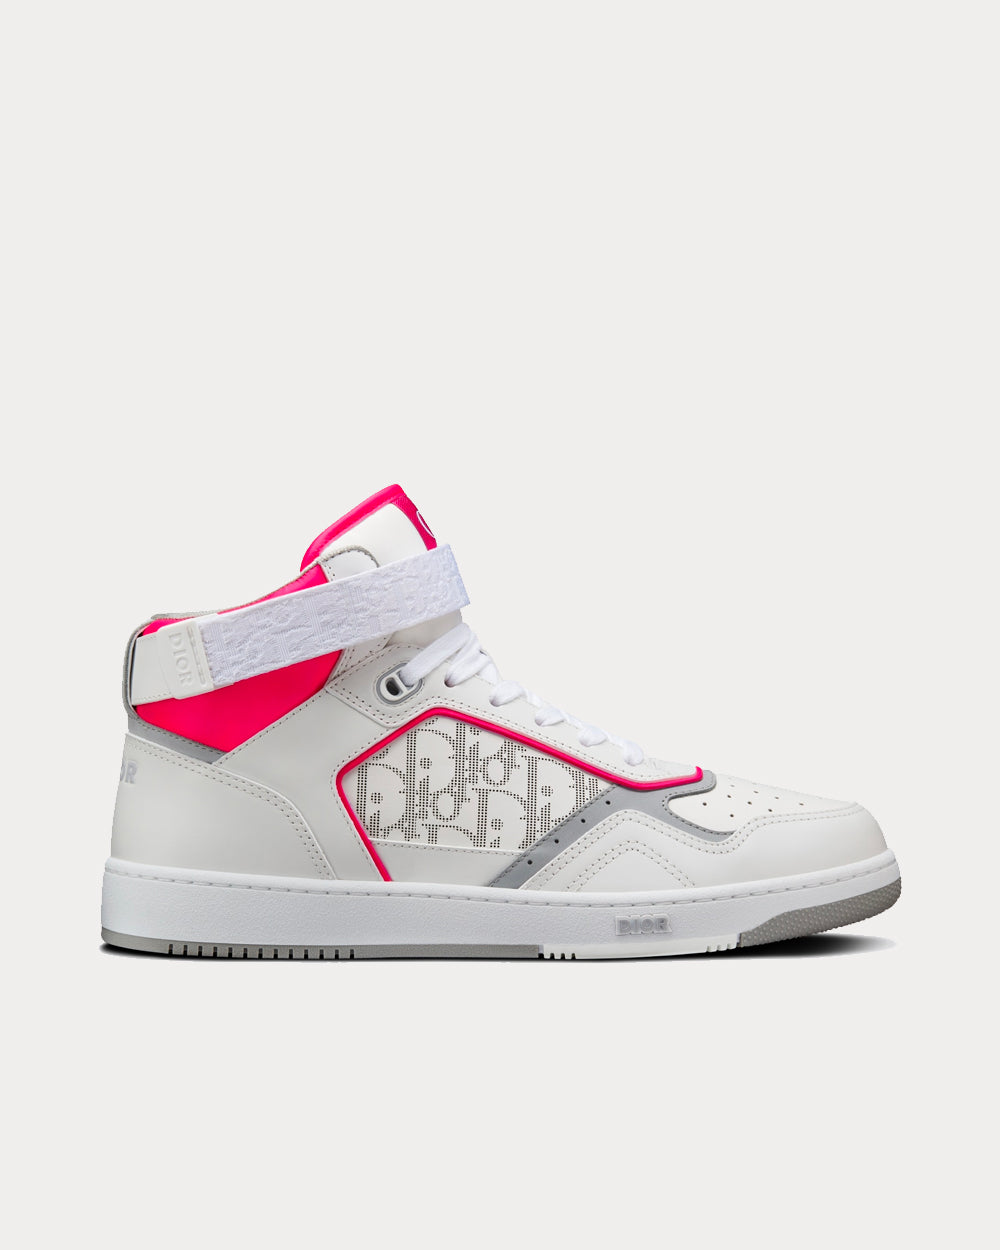 Dior B27 White and Neon Pink Smooth Calfskin with White Dior Oblique